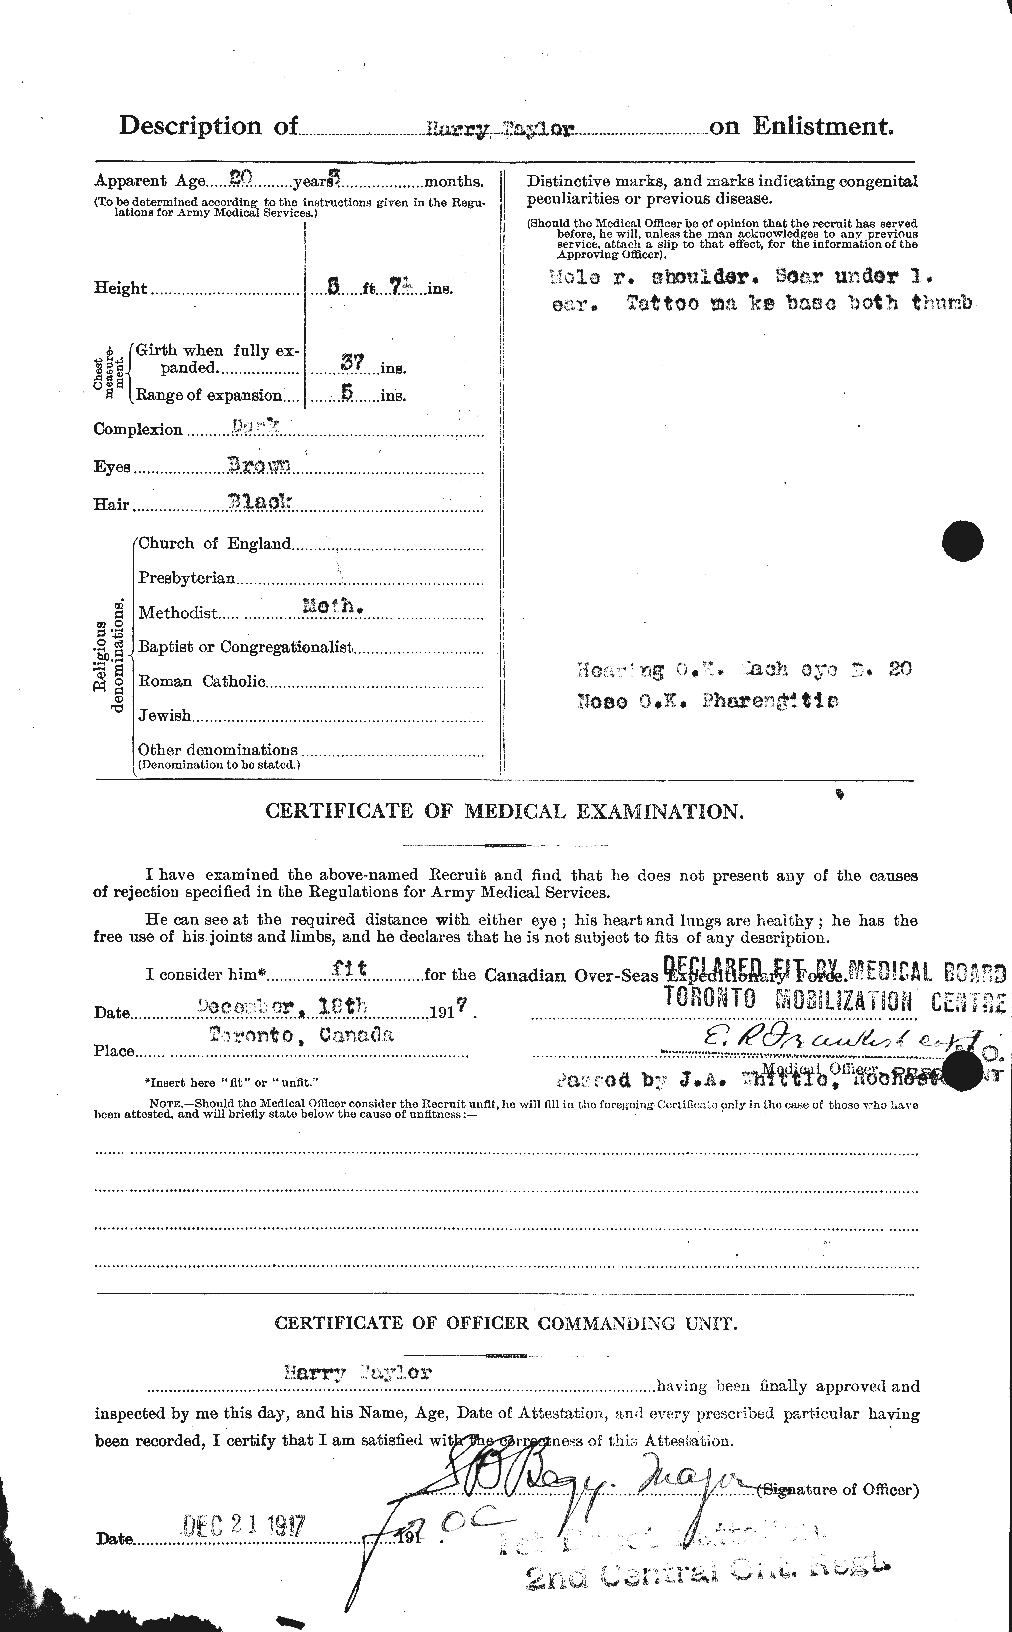 Personnel Records of the First World War - CEF 626473b